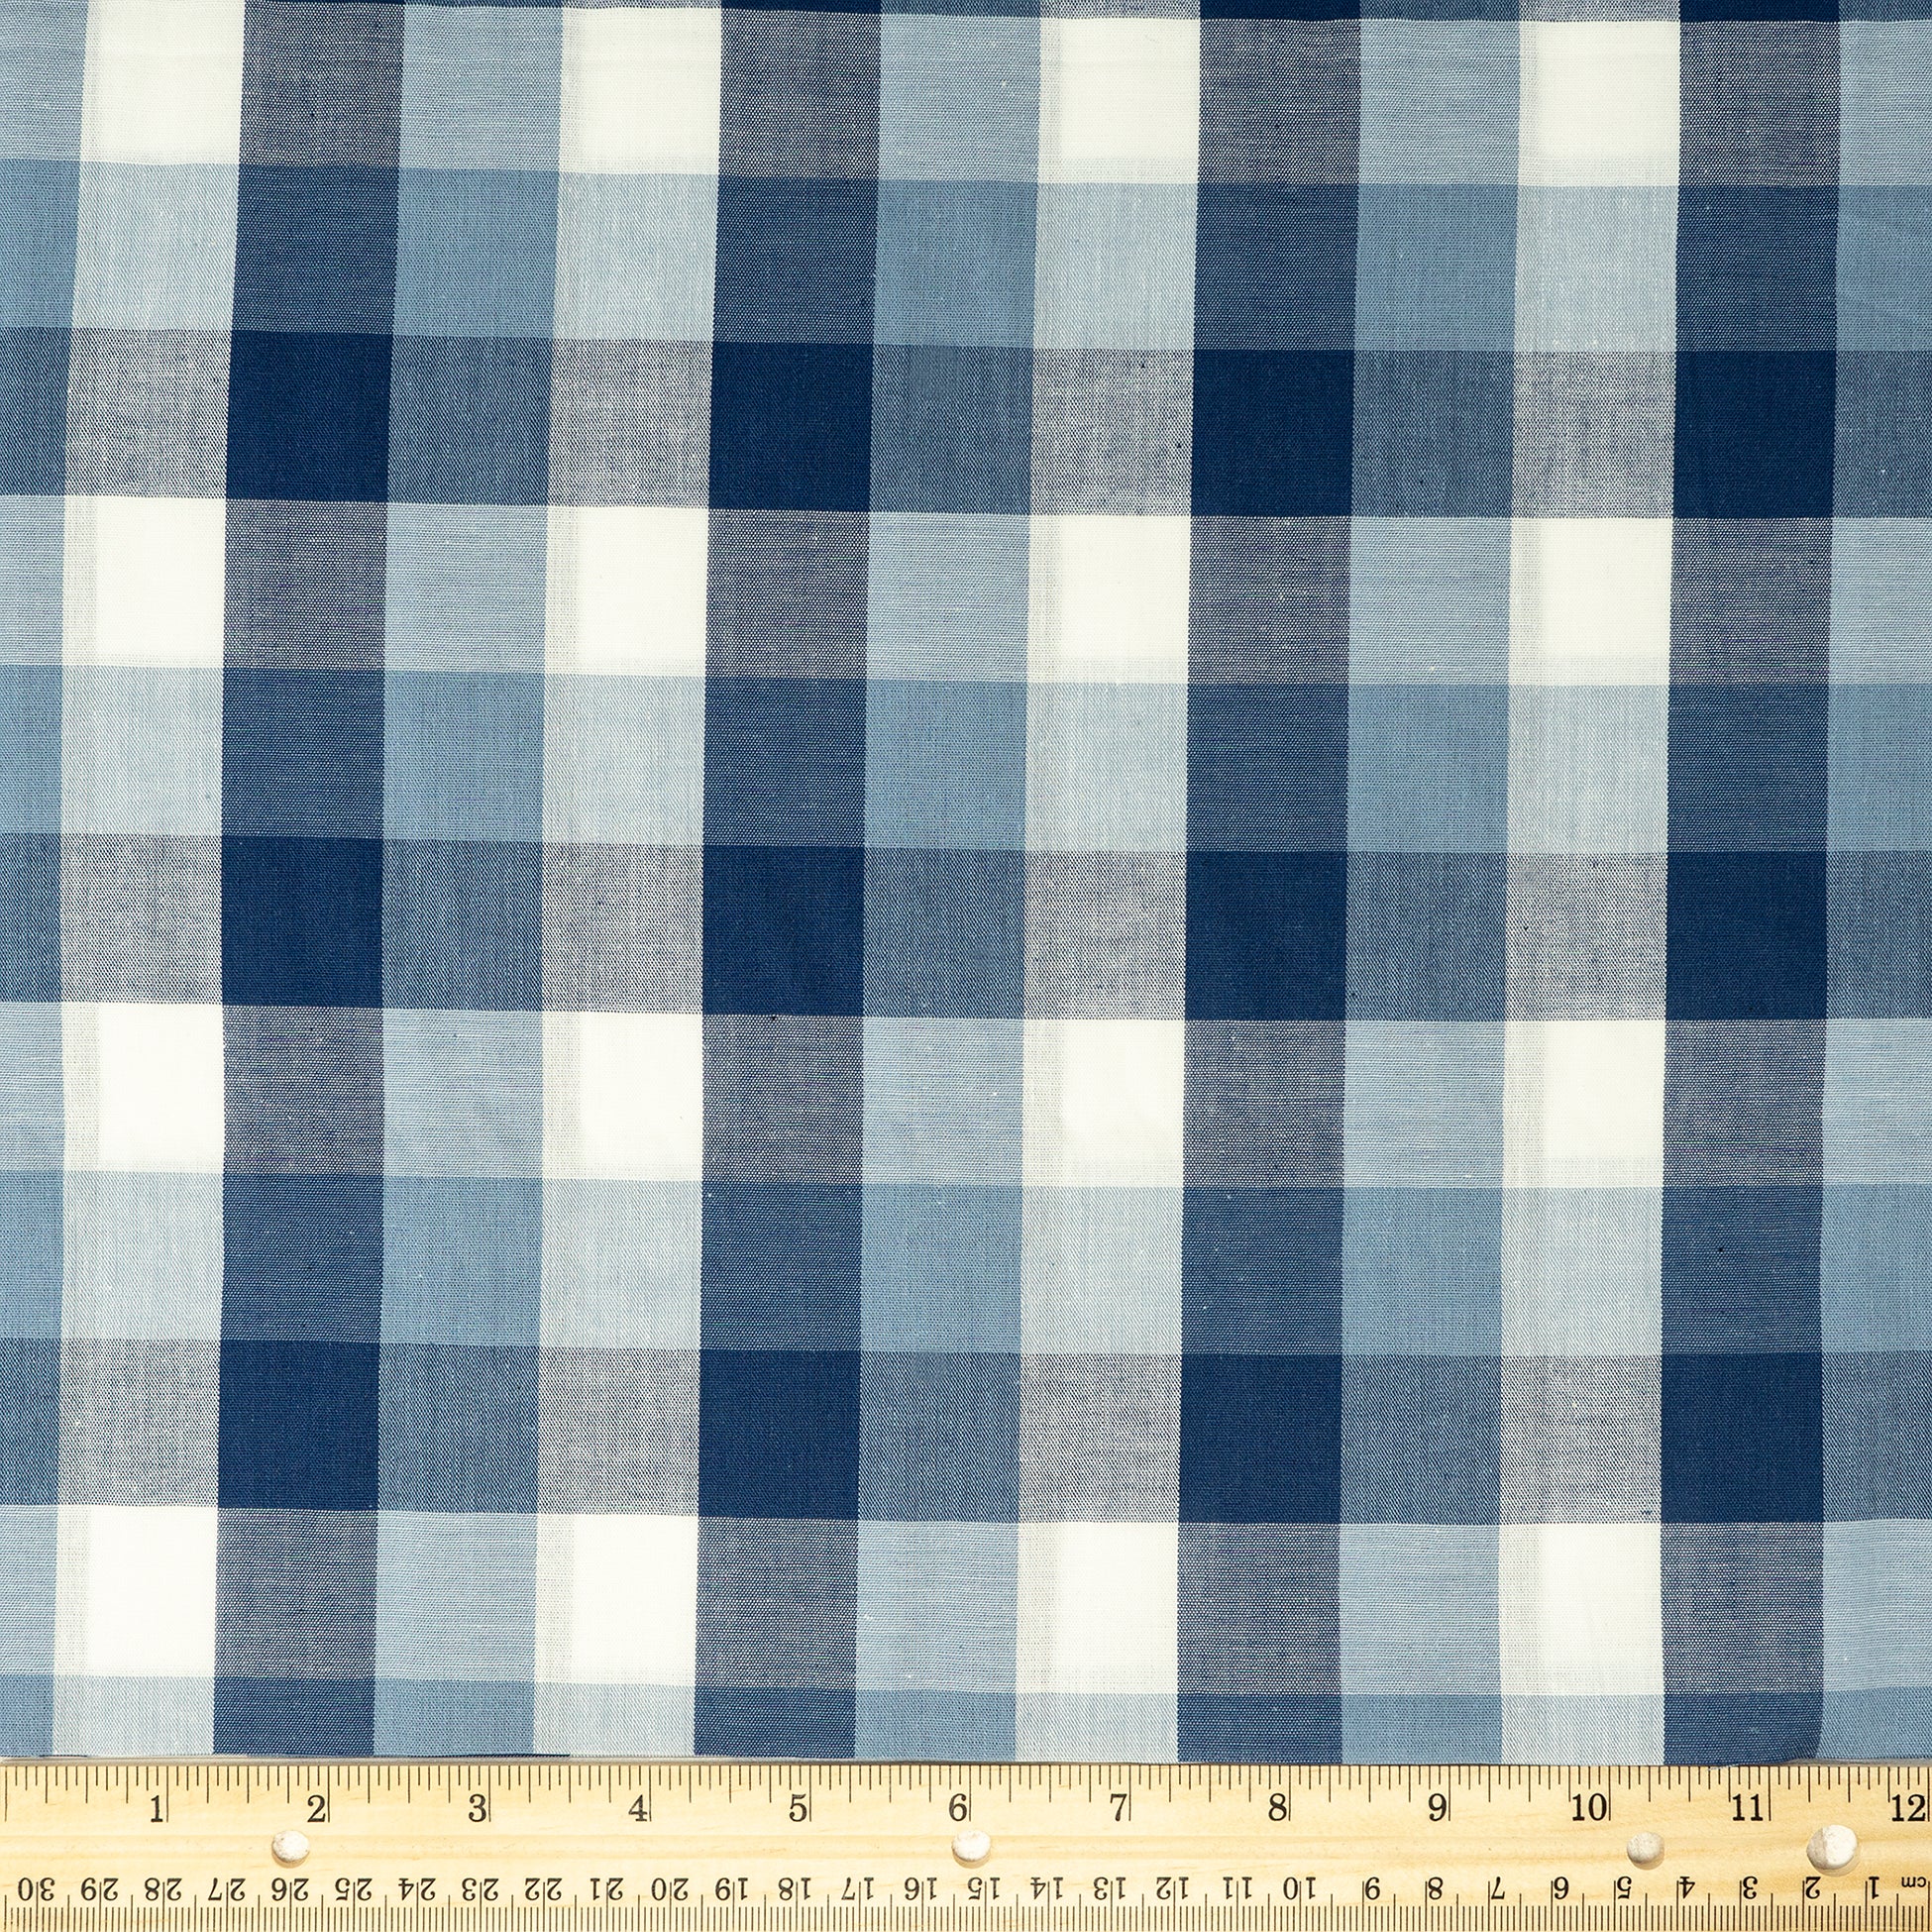 Waverly Inspirations Cotton 44" 1/8" Gingham Ink Color Sewing Fabric by the Yard